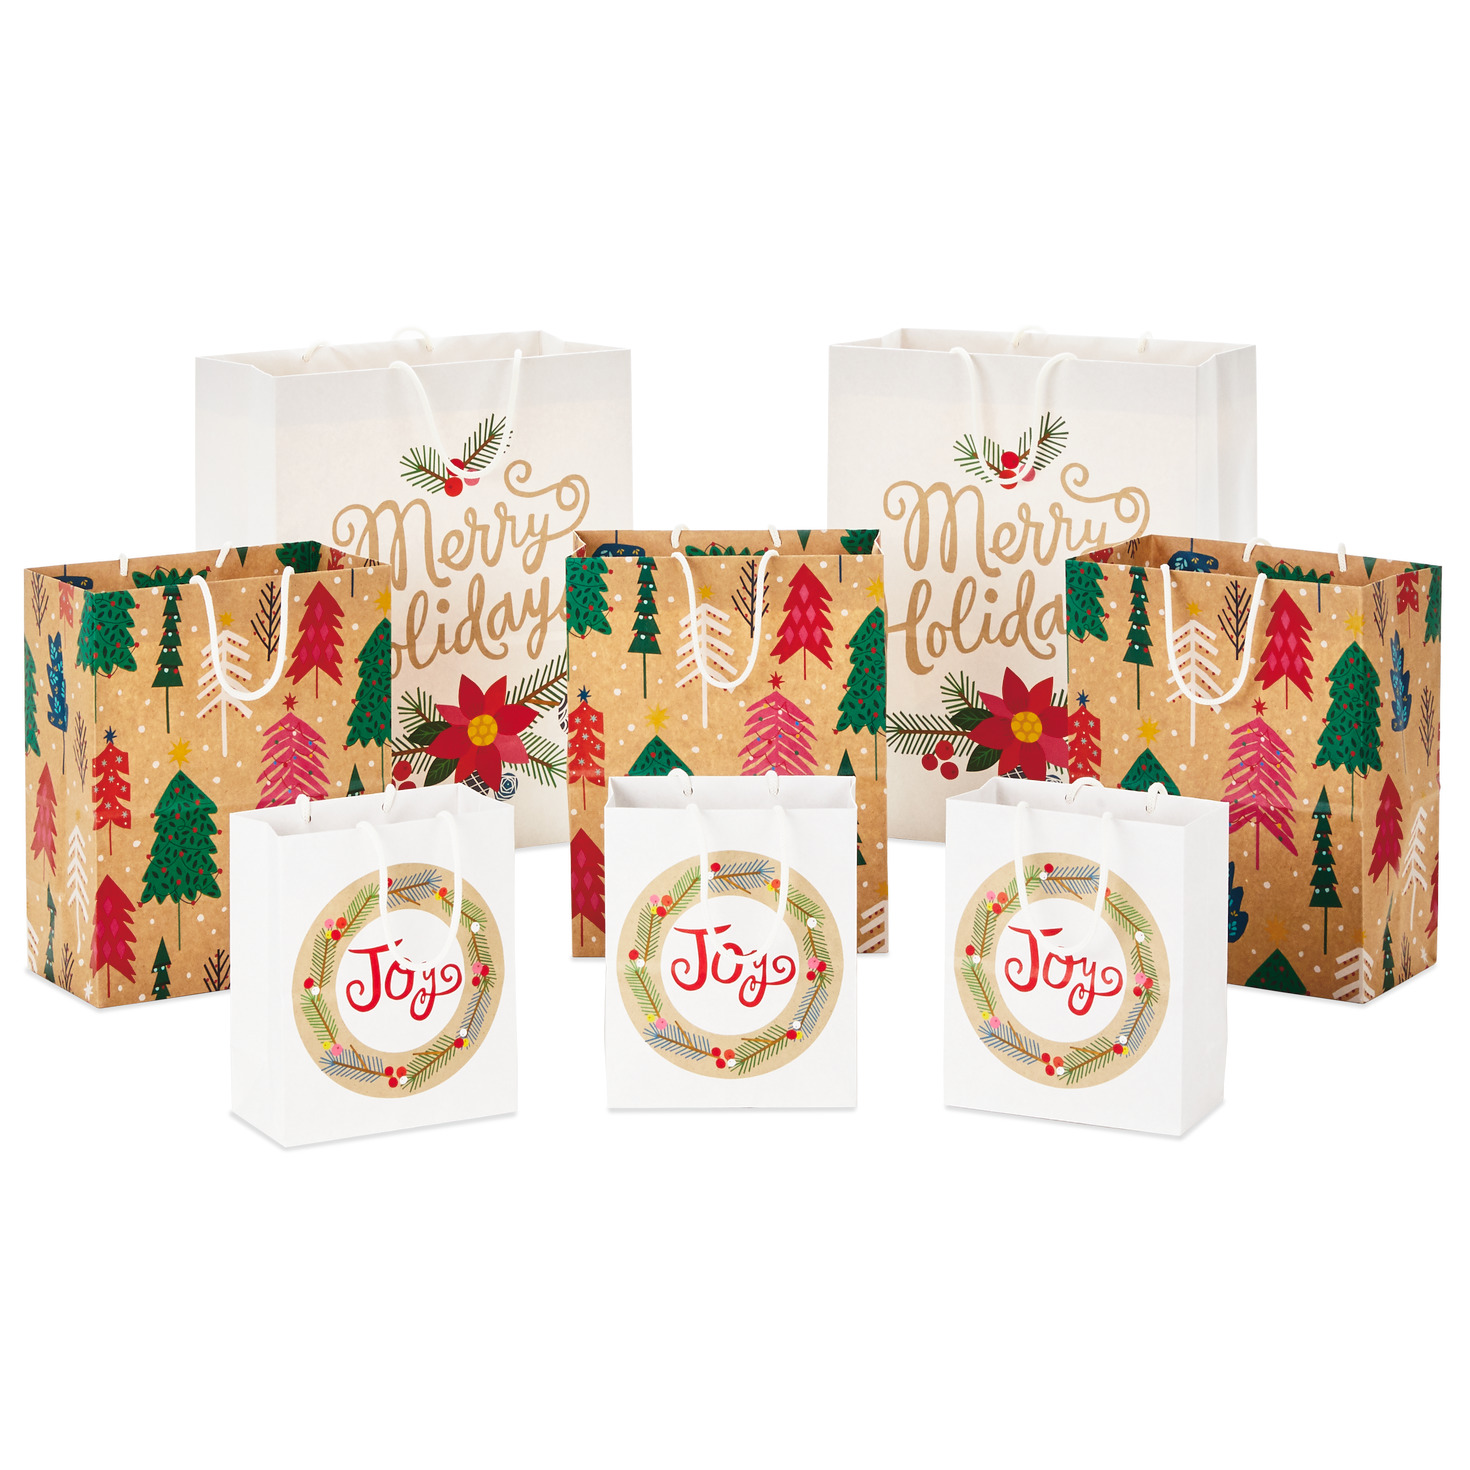 Assorted Holiday Merry 8-Pack Small, Medium and Large Christmas Gift Bags  for only USD 12.99 | Hallmark